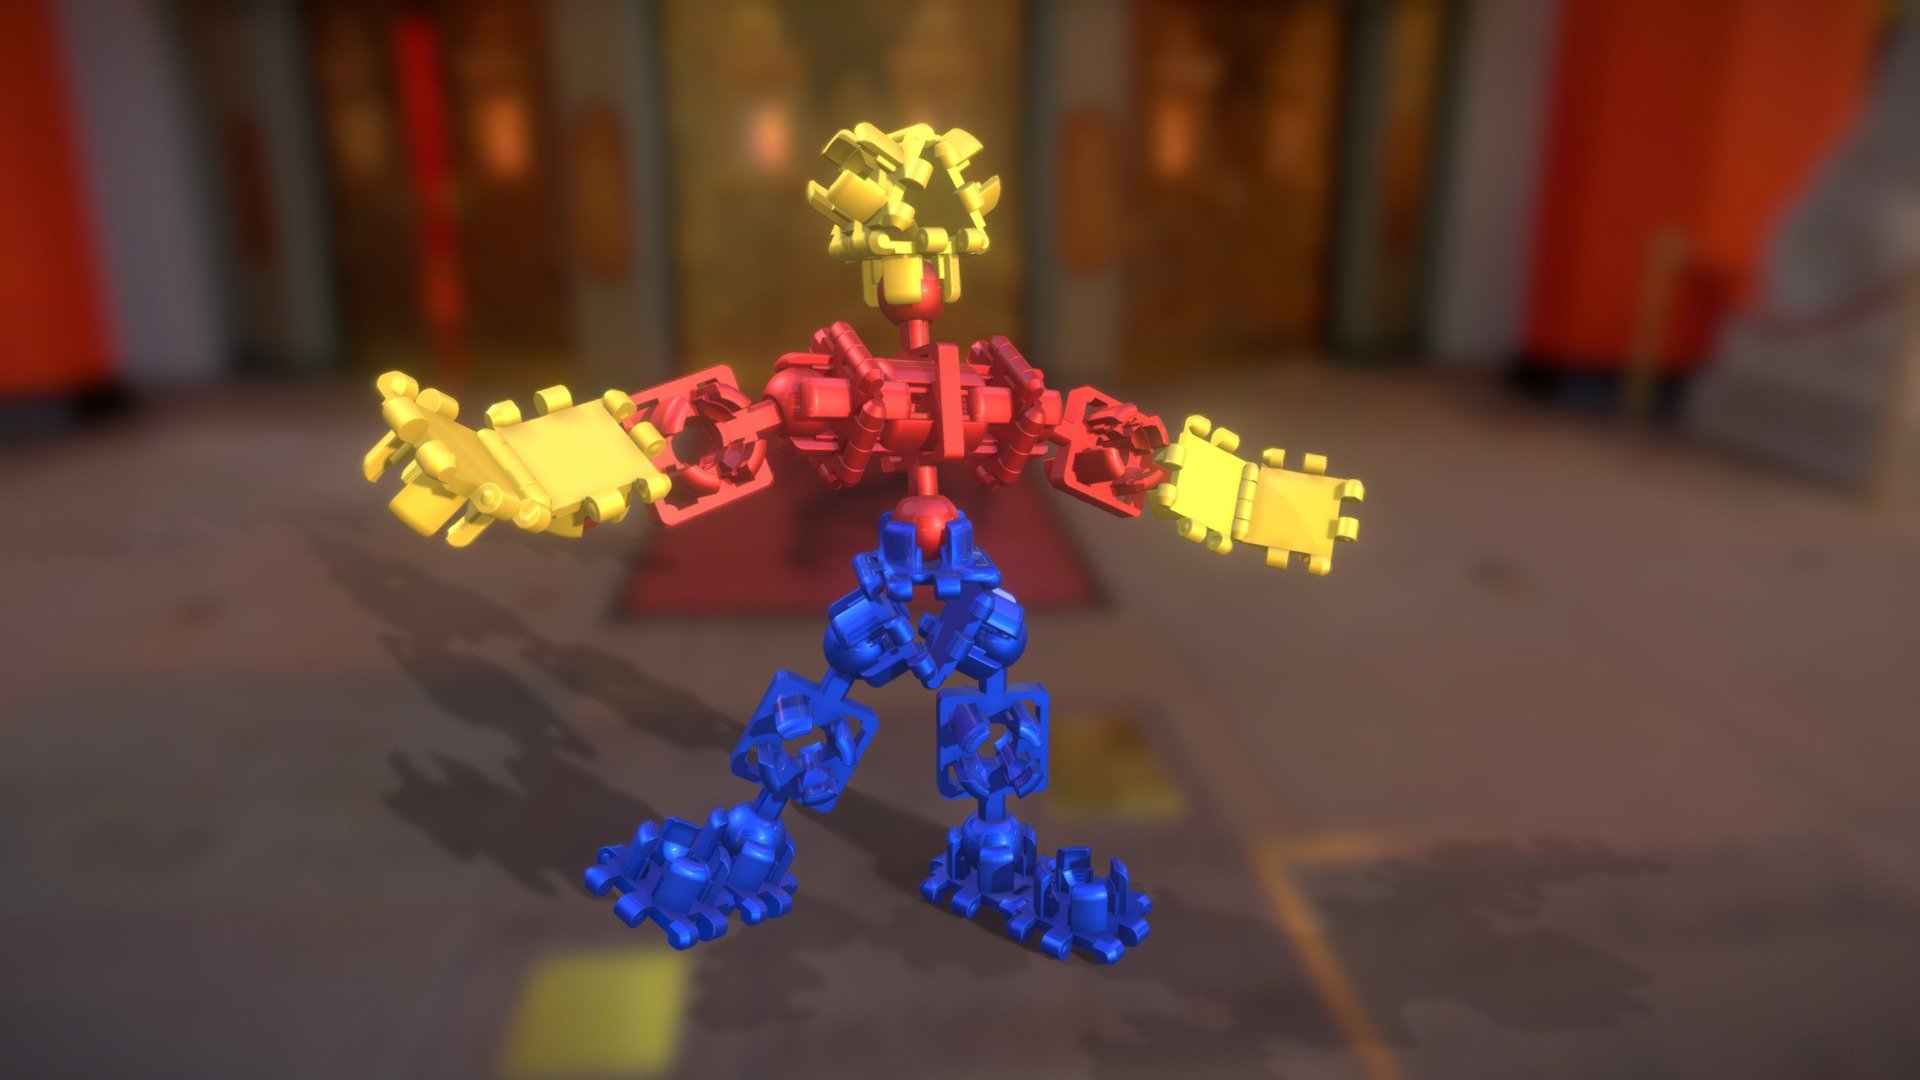 Introducing the biobrx acrobot character! 
Use AR mode to use your phone to put him anywhere, take a photo, and share and also upload to the biobrx.ai website to use as a seed image for AI art creation! - Biobrx Acrobot Welcome Pose - 3D model by biobrx 3d model